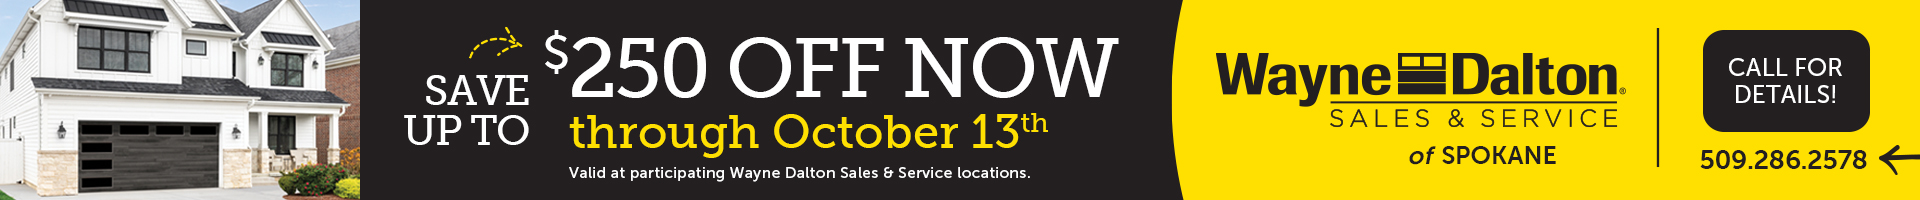 ad web banner that says save up to $250 through October 13th. Call wayne dalton sales and service spokane for details.